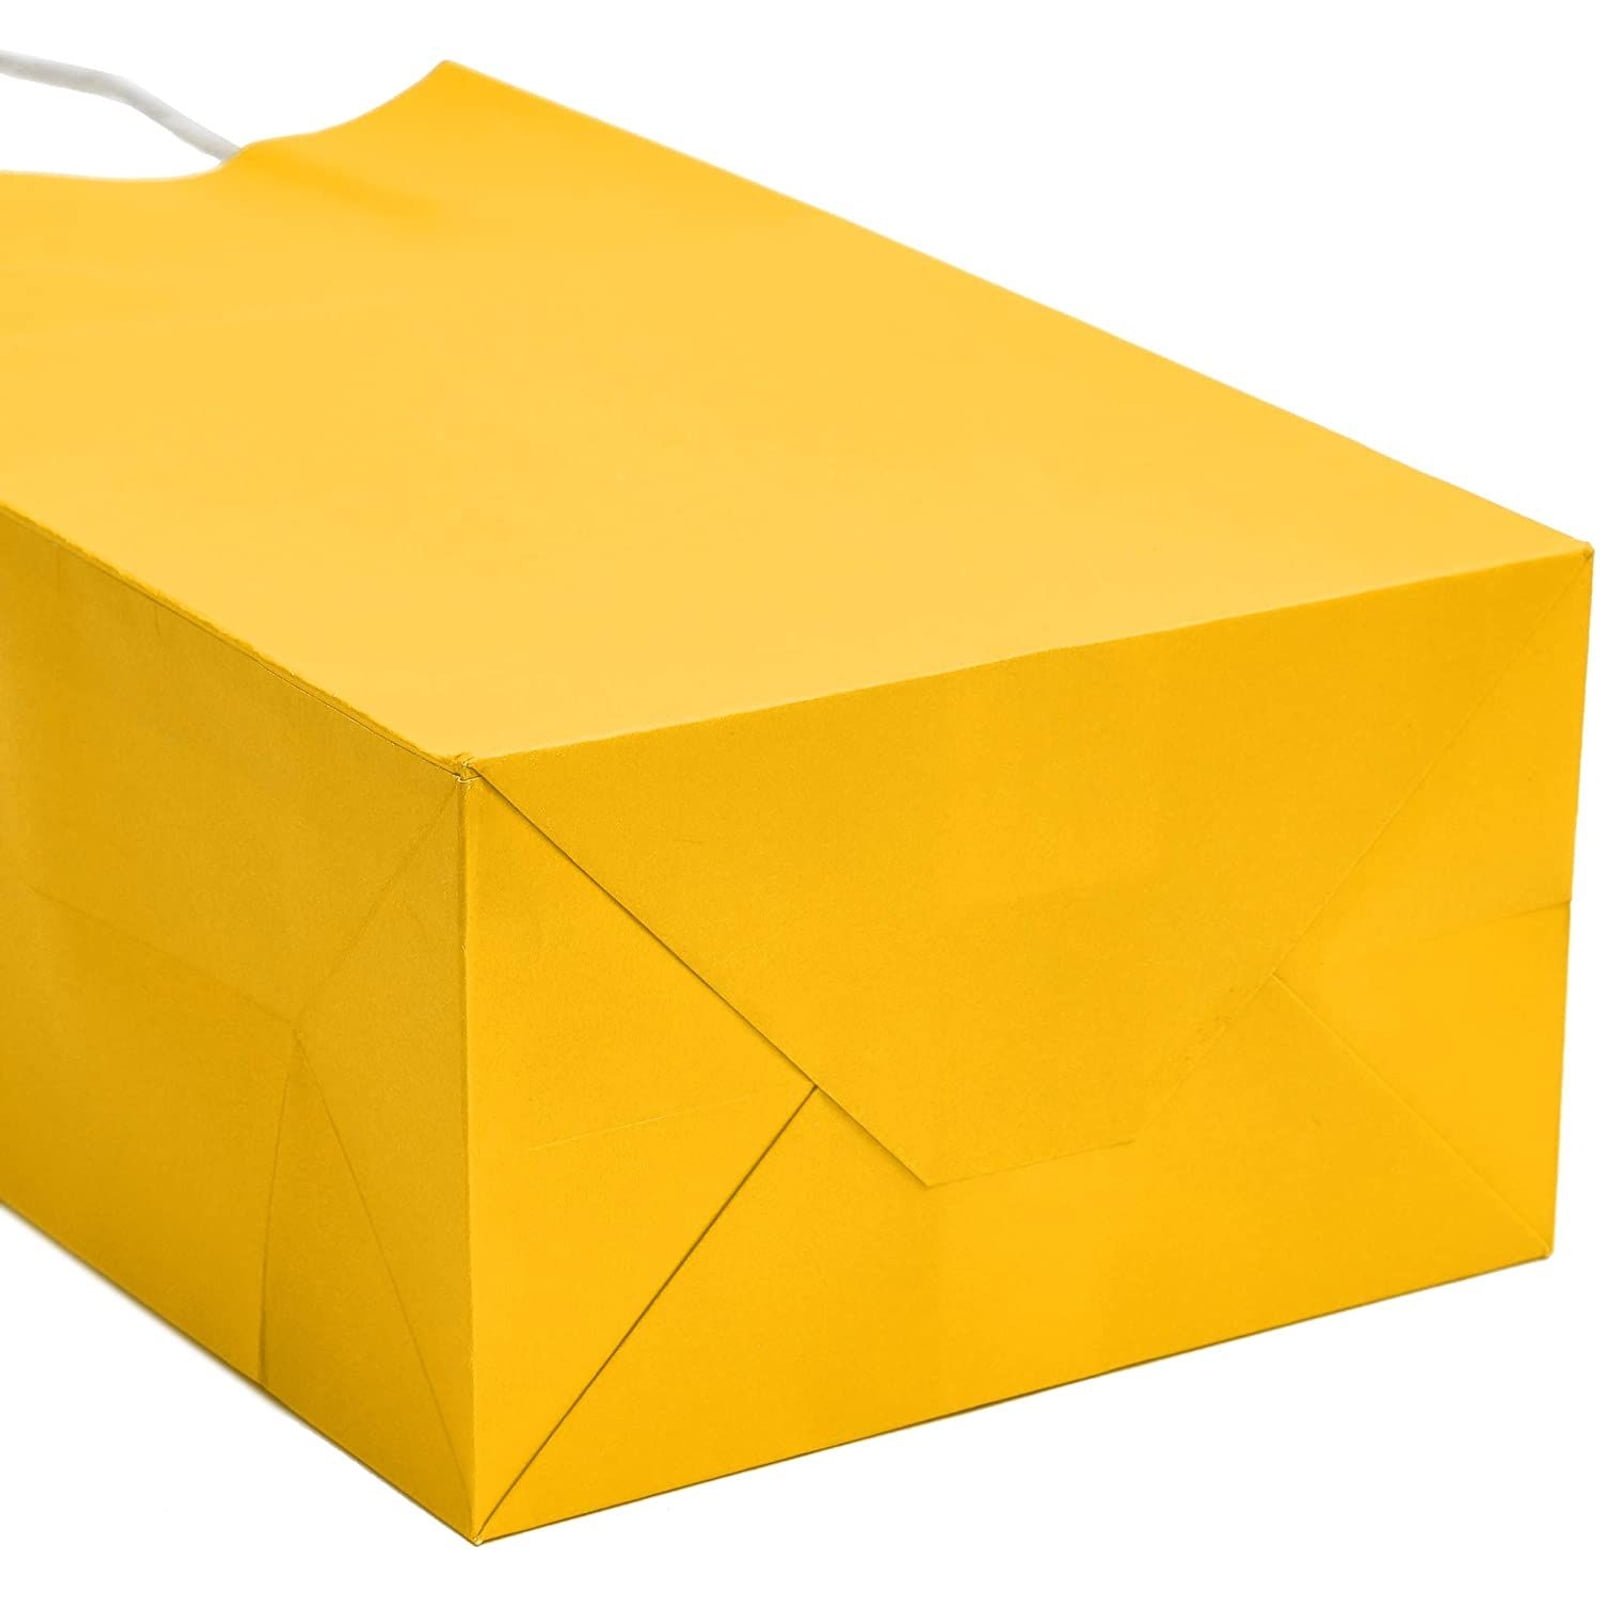 YELLOW Colored Paper Bags with Twisted Handles - 10 x 5 x 12H“